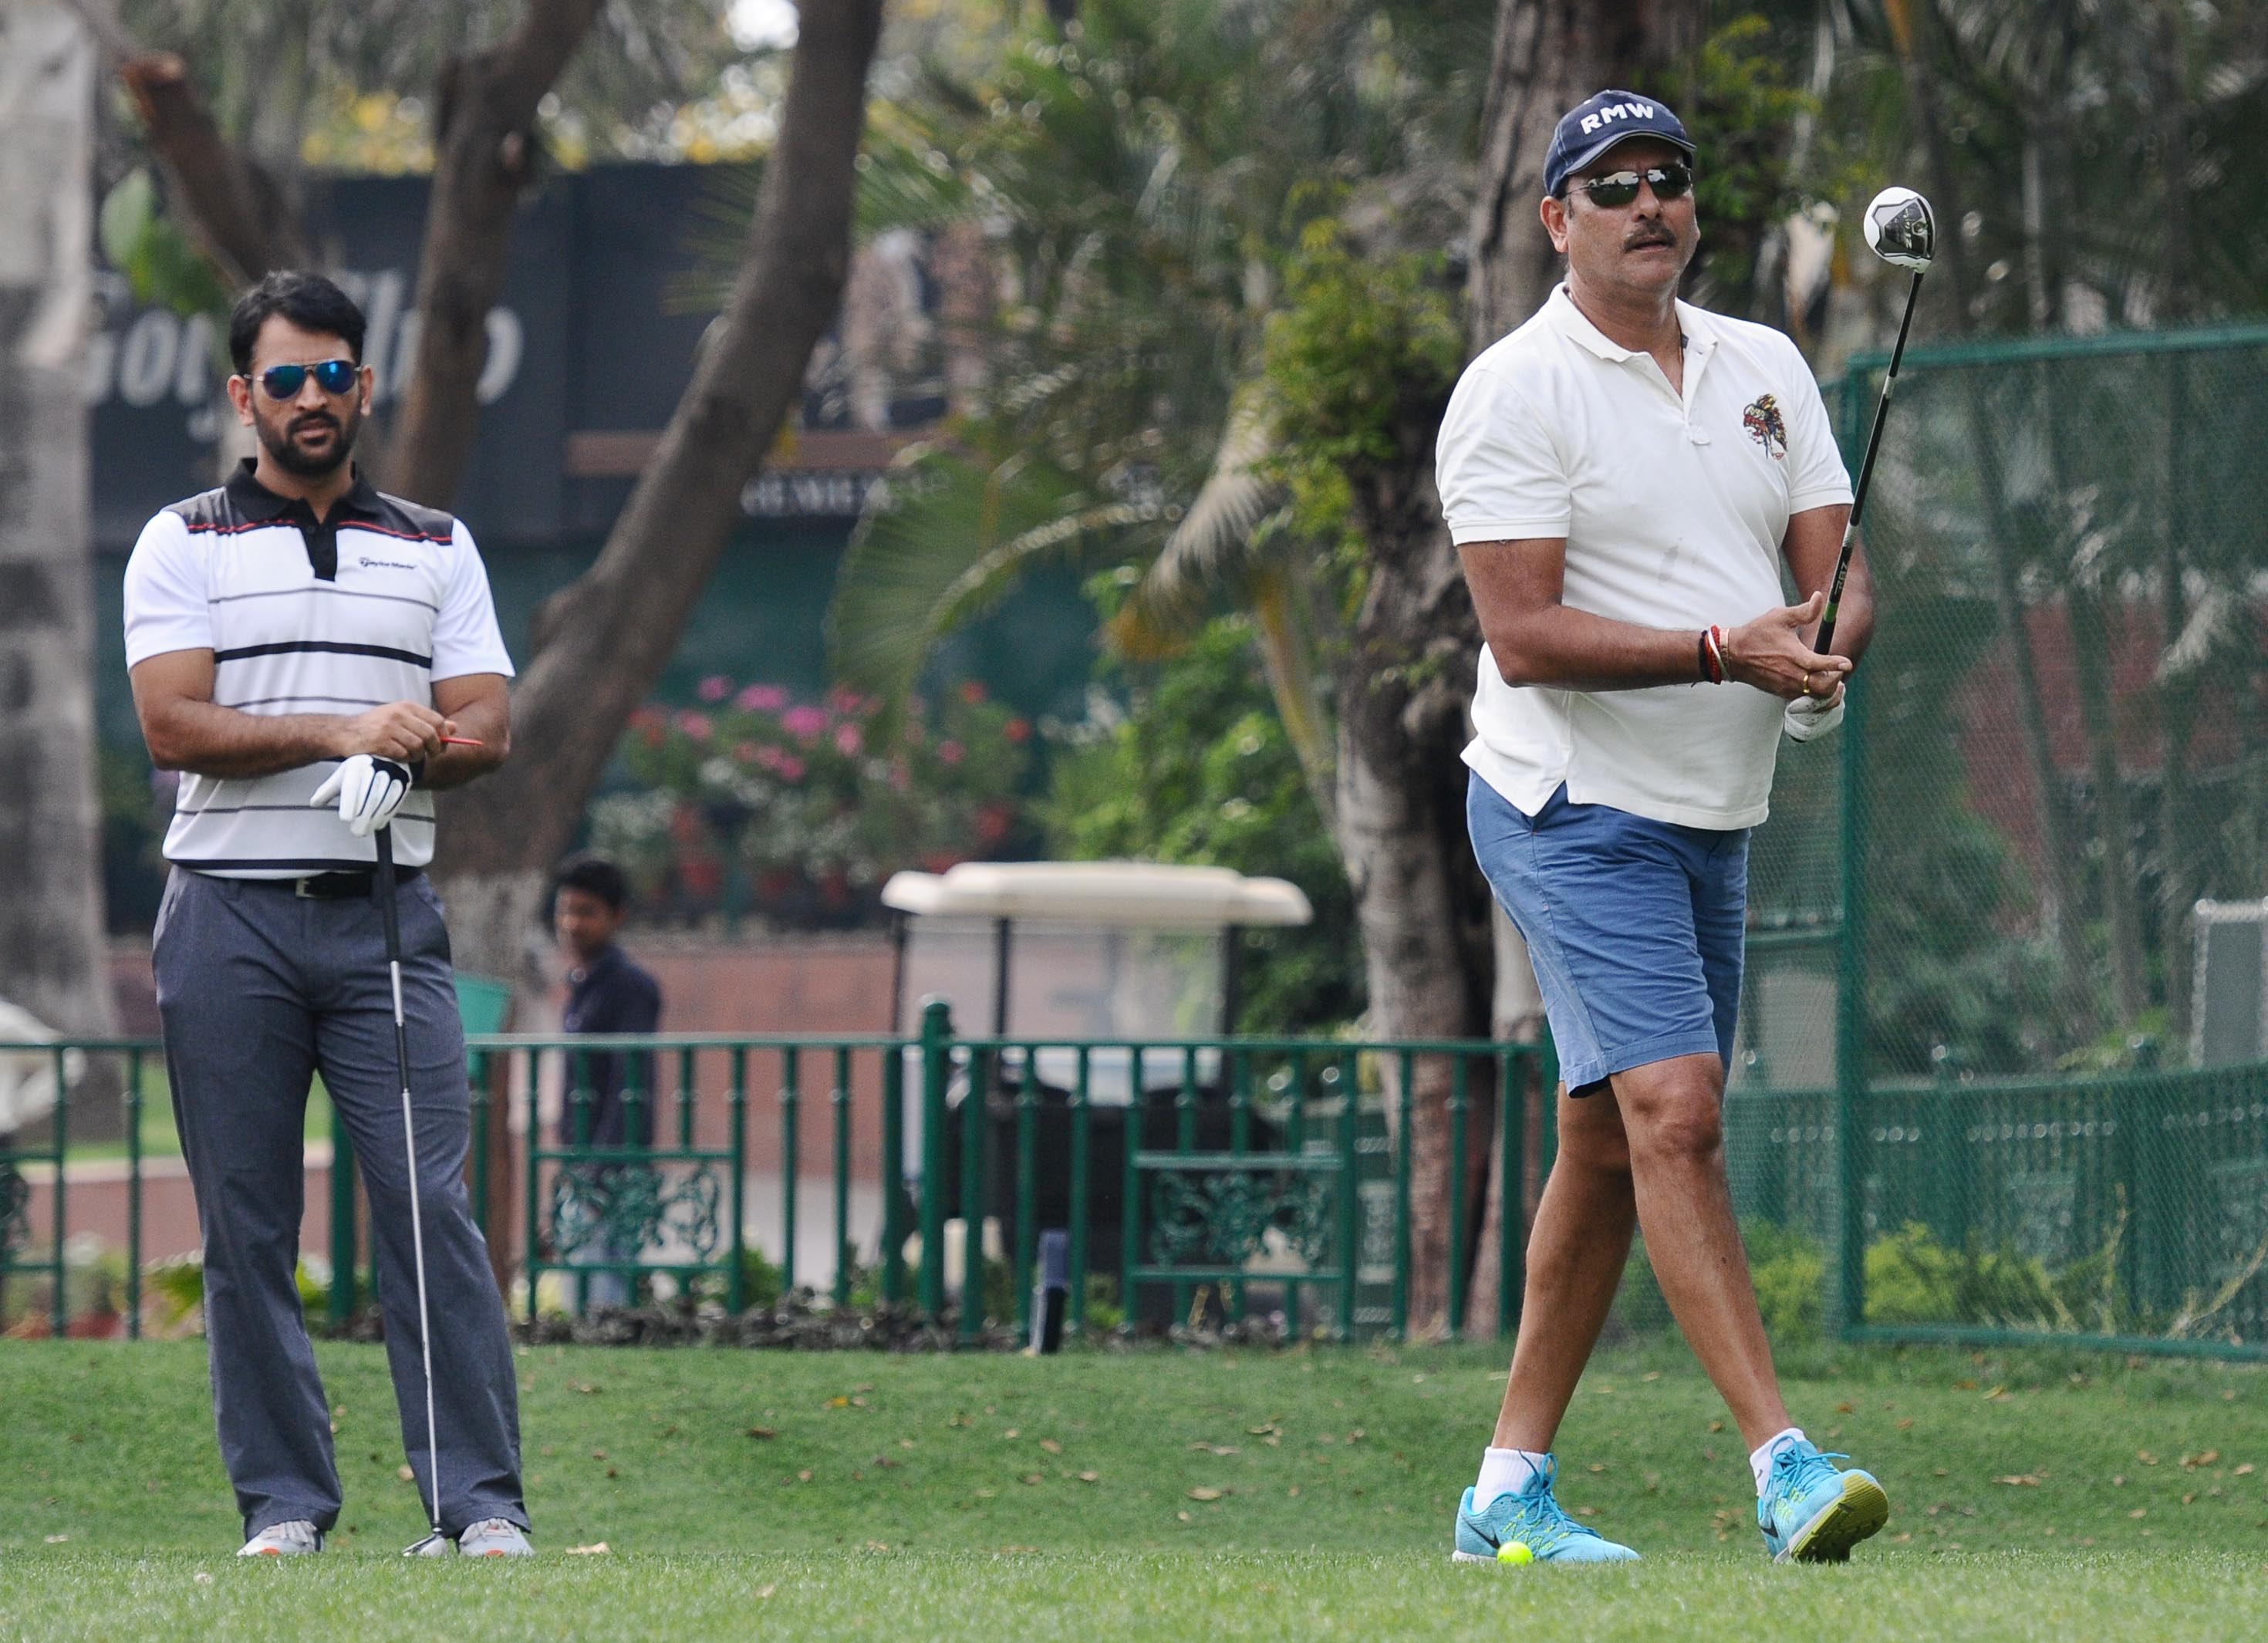 Satire | Ravi Shastri gives performance reviews to his players in PTA meeting